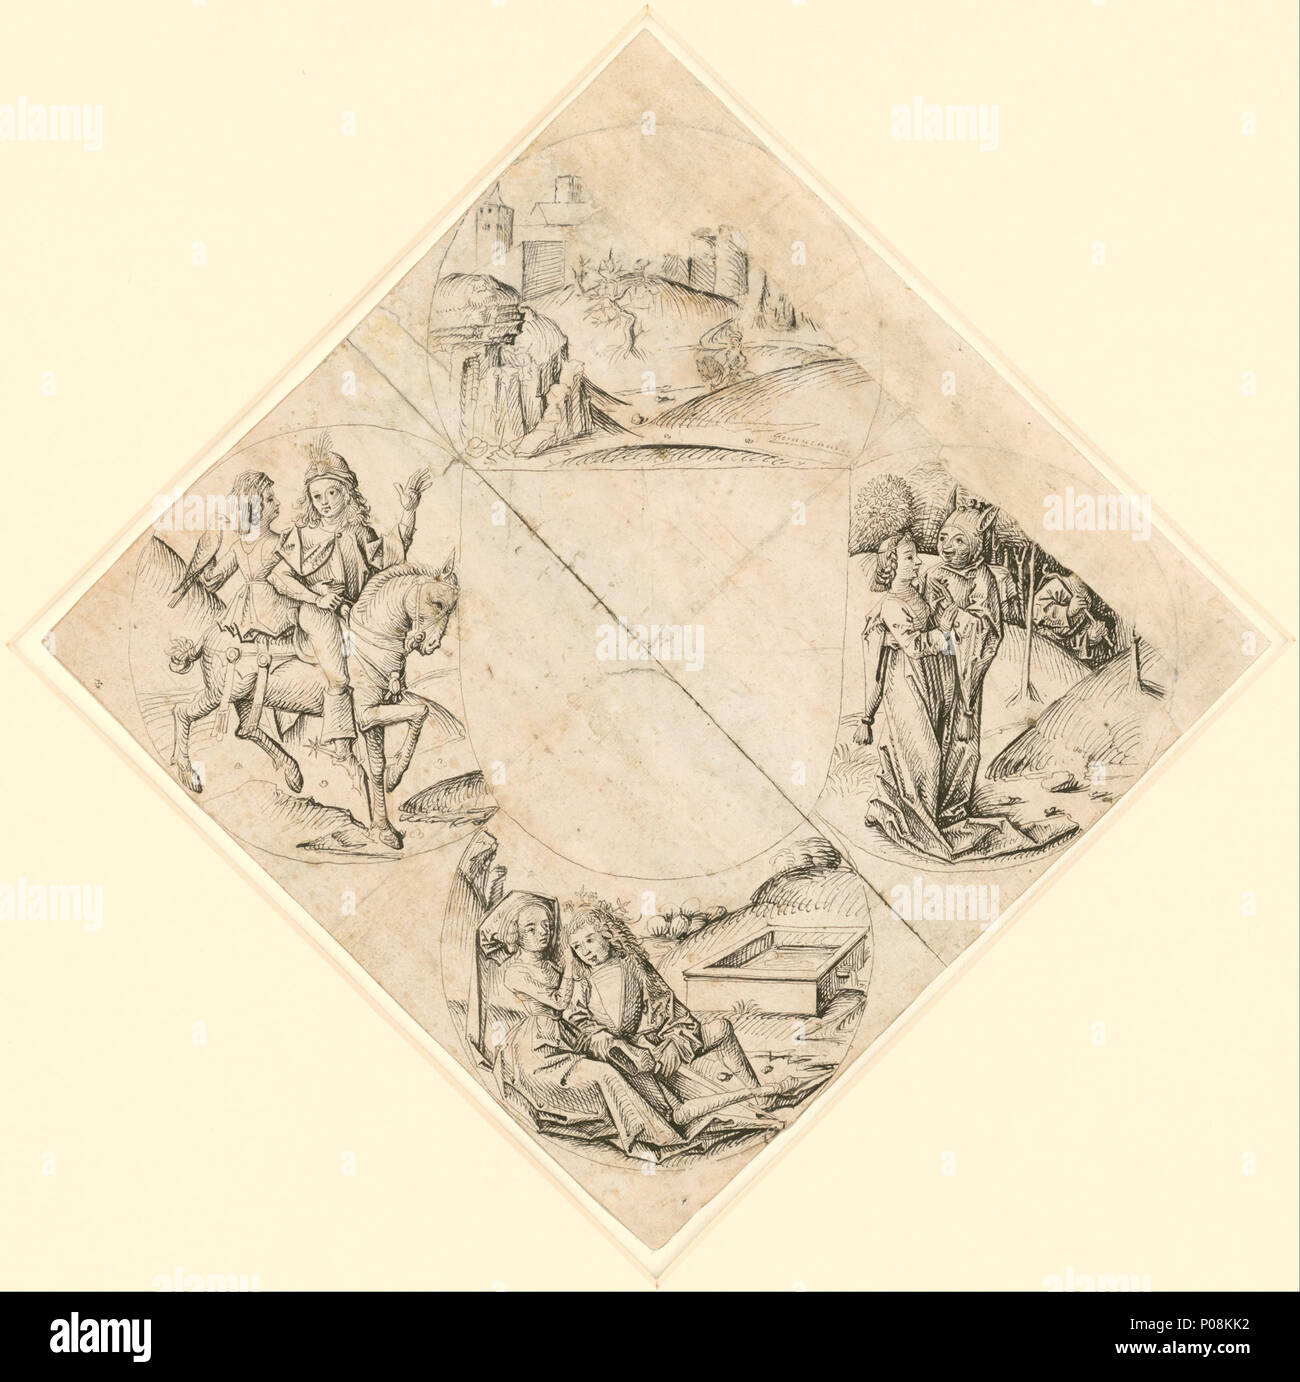 .  Design for a Quatrefoil with a Castle, Two Lovers, a Maiden Tempted by a Fool, a Couple Seated by a Trough, and a Knight and His Lover Mounted on a Horse . about 1475 - 1490 271 After The Master of the Housebook (German, active about 1470 - 1500) - Design for a Quatrefoil with a Castle, Two Lovers, a Maiden Tempted by a Fool, a Couple Seated by a ... - Google Art Project Stock Photo